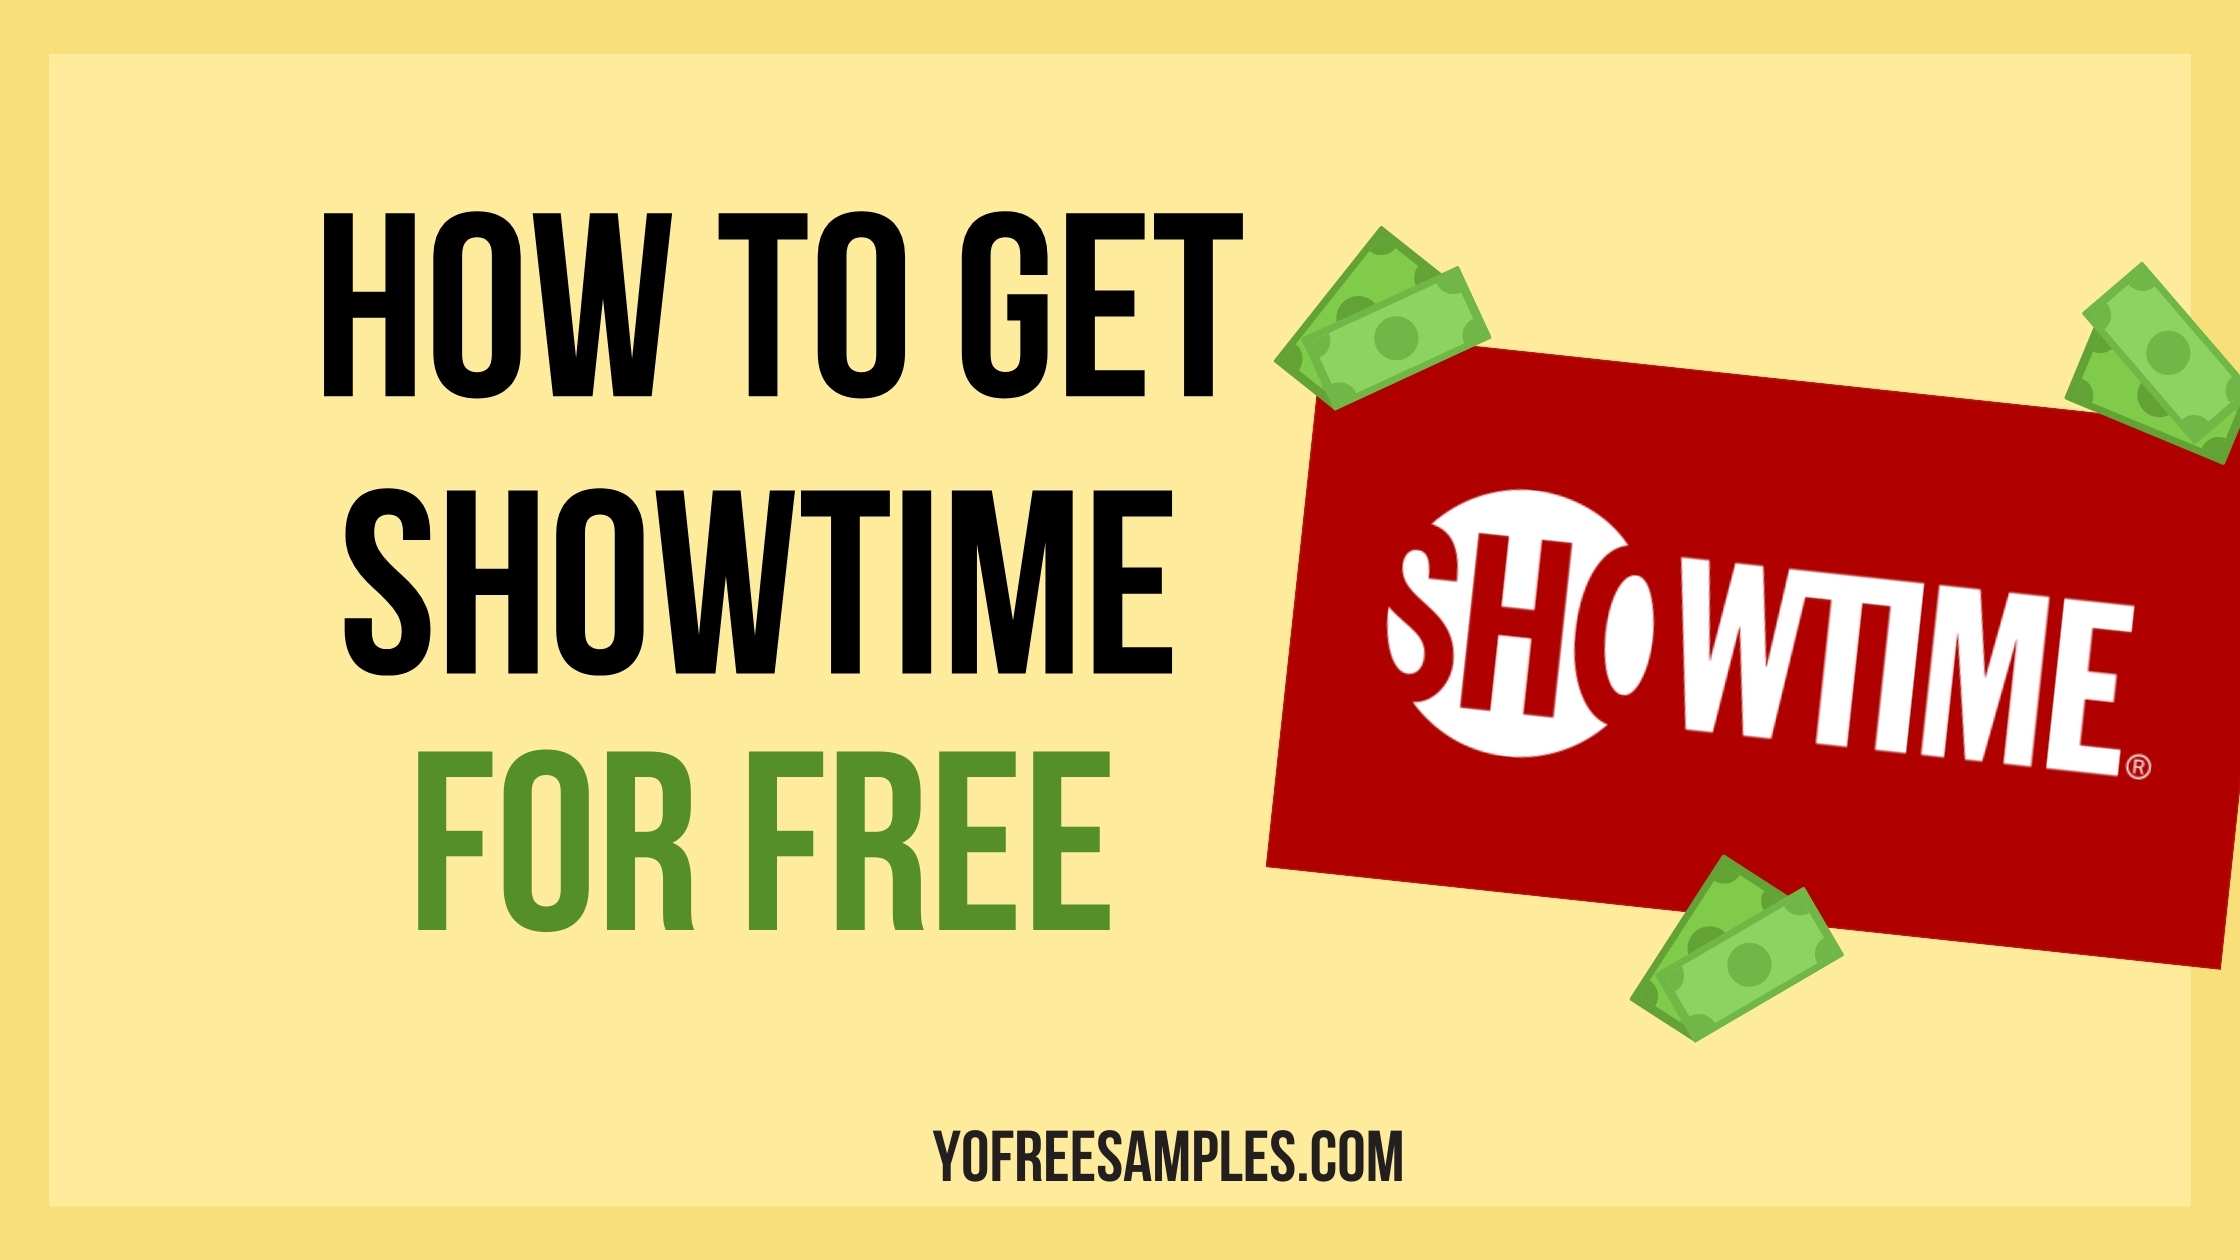 How To Get Showtime For Free